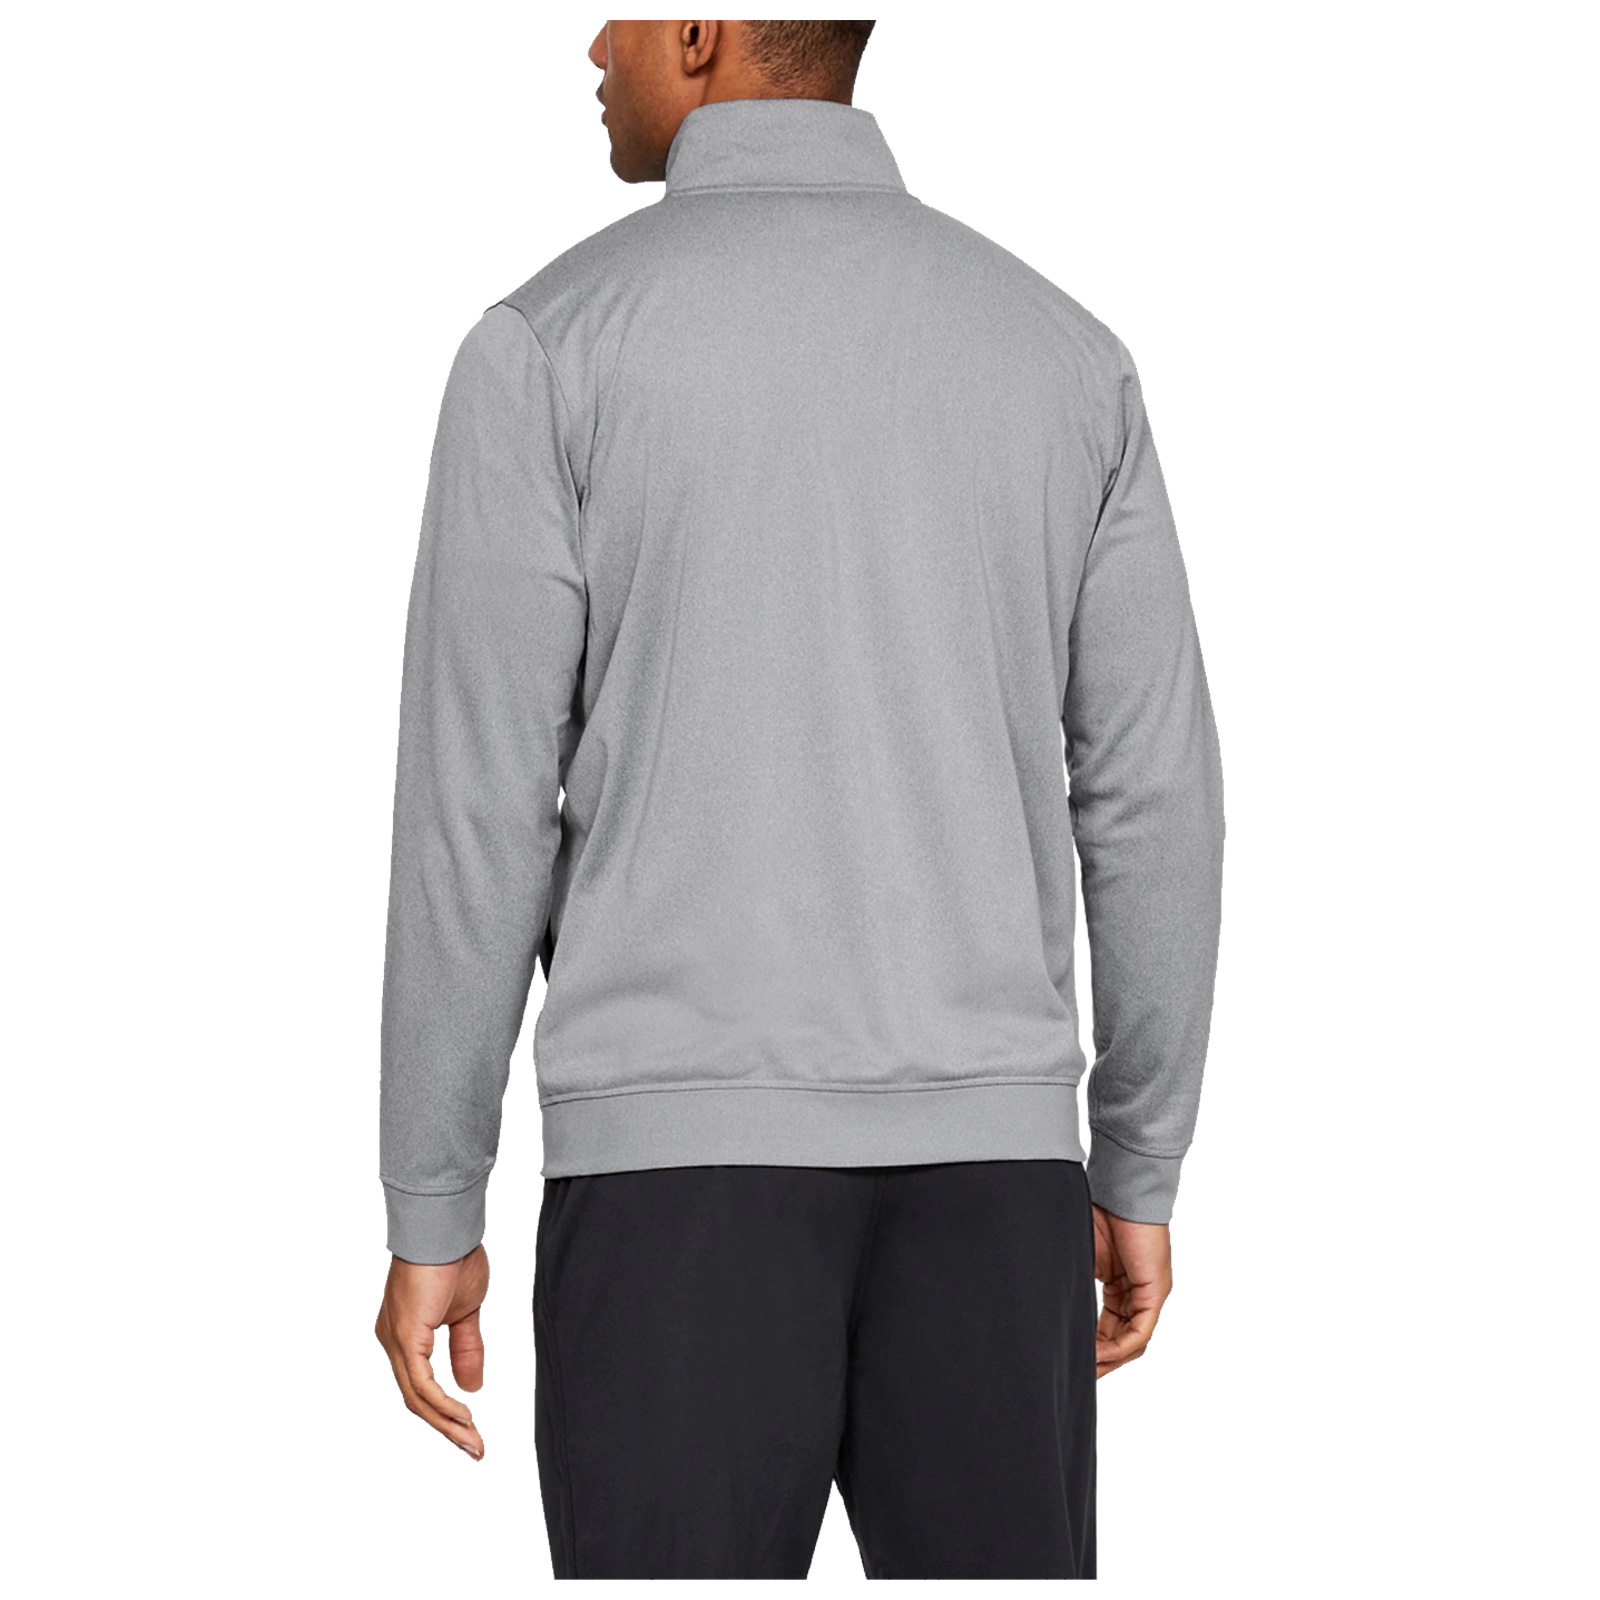 2021 Under Armour Mens Sportstyle Tricot Full Zip Track Running Sports ...